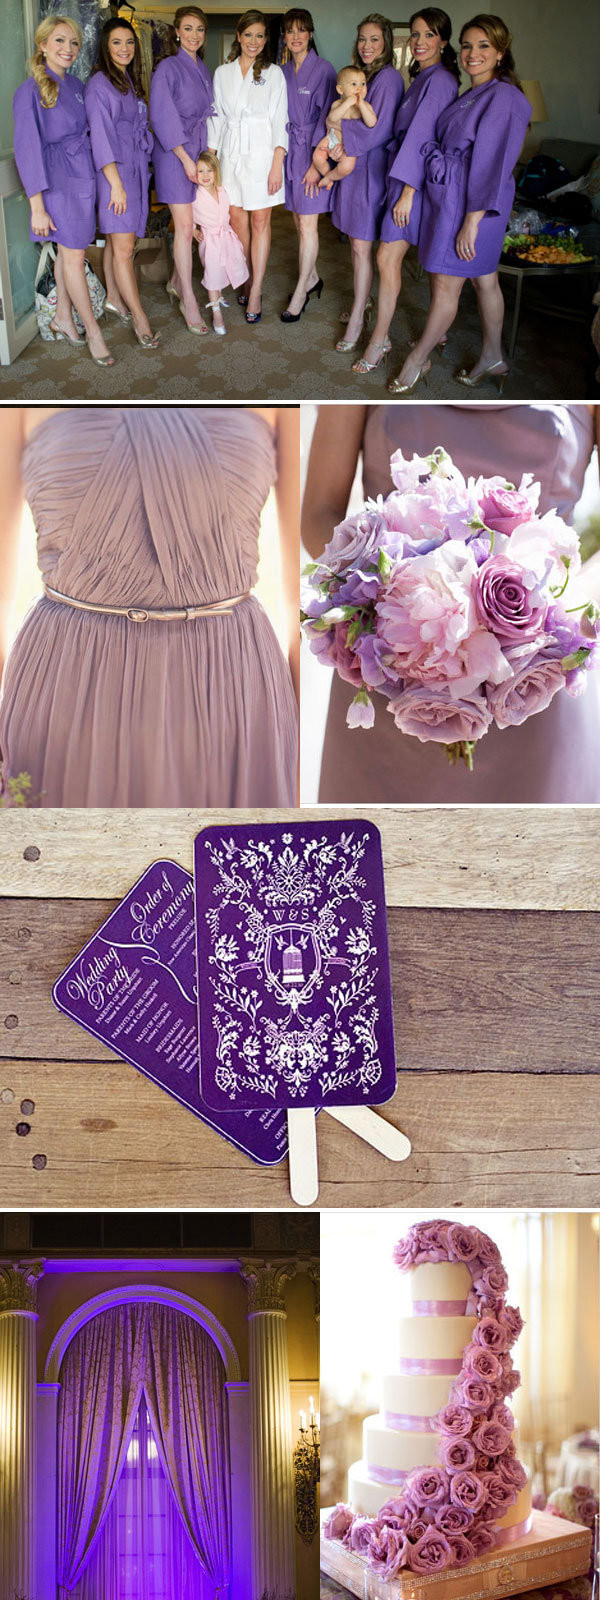 Purple Wedding Themes
 What Your Wedding Color Says About Your Personality